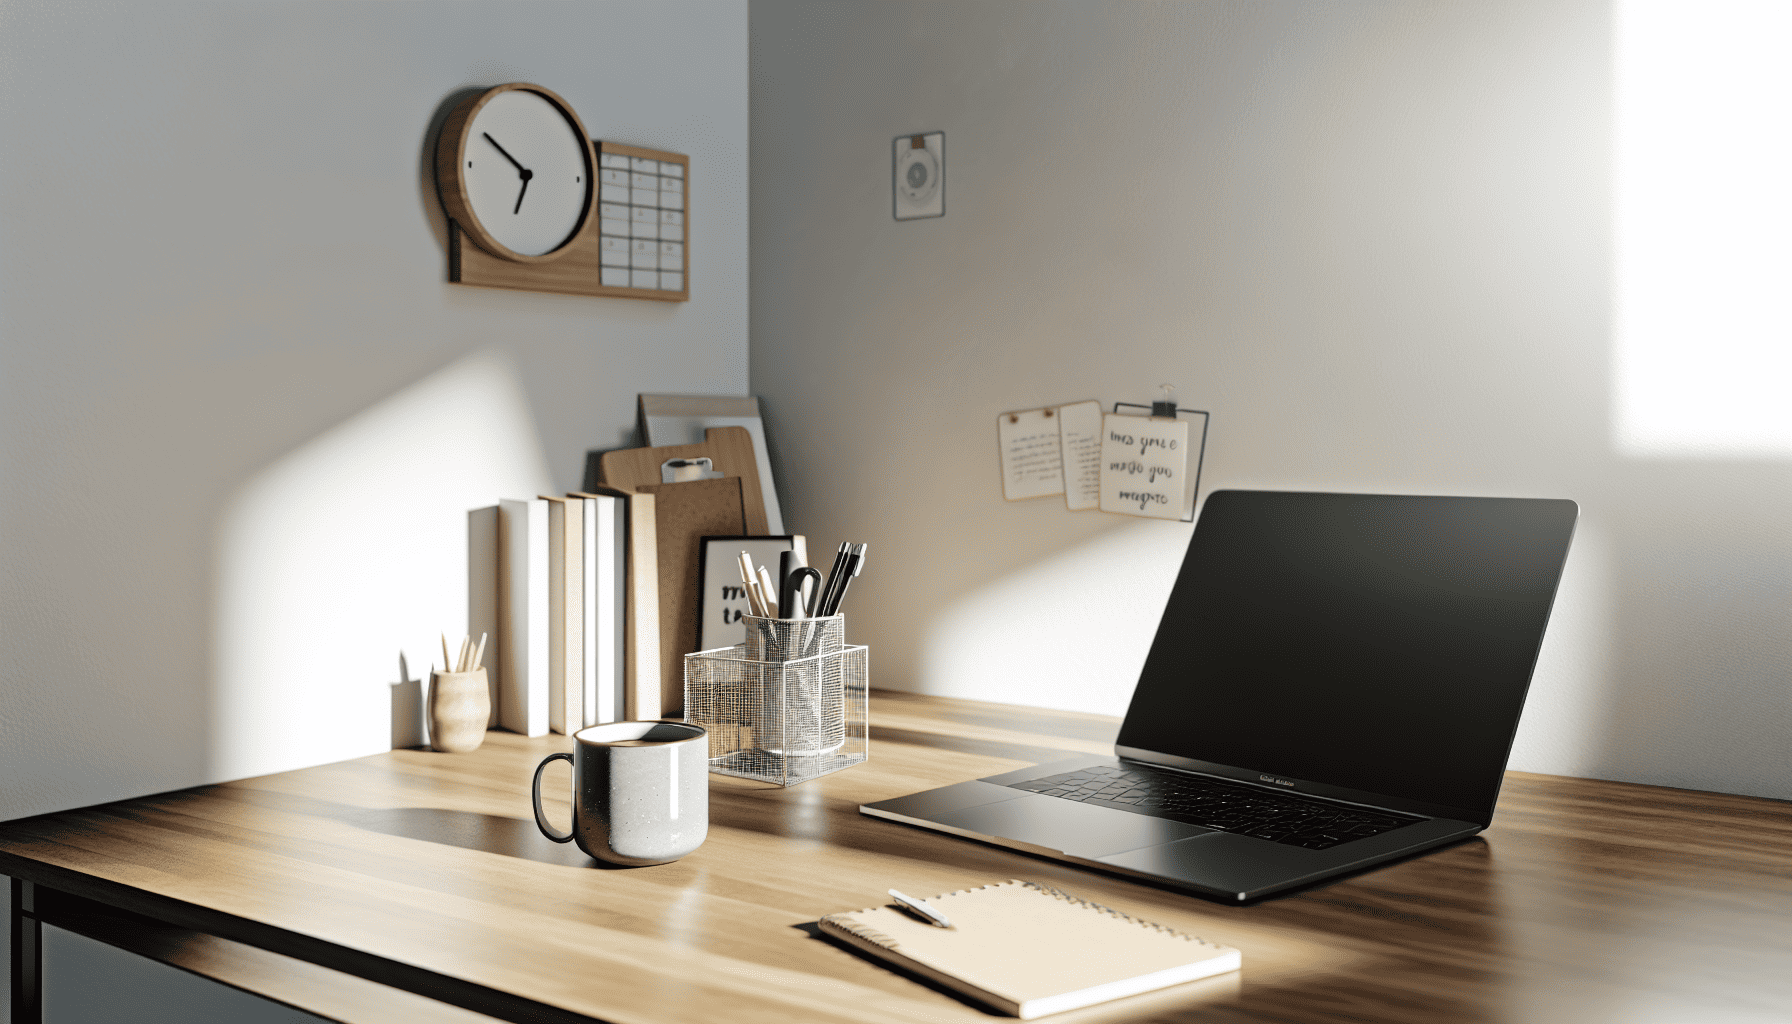 Decluttered workspace with organized desk and minimal items